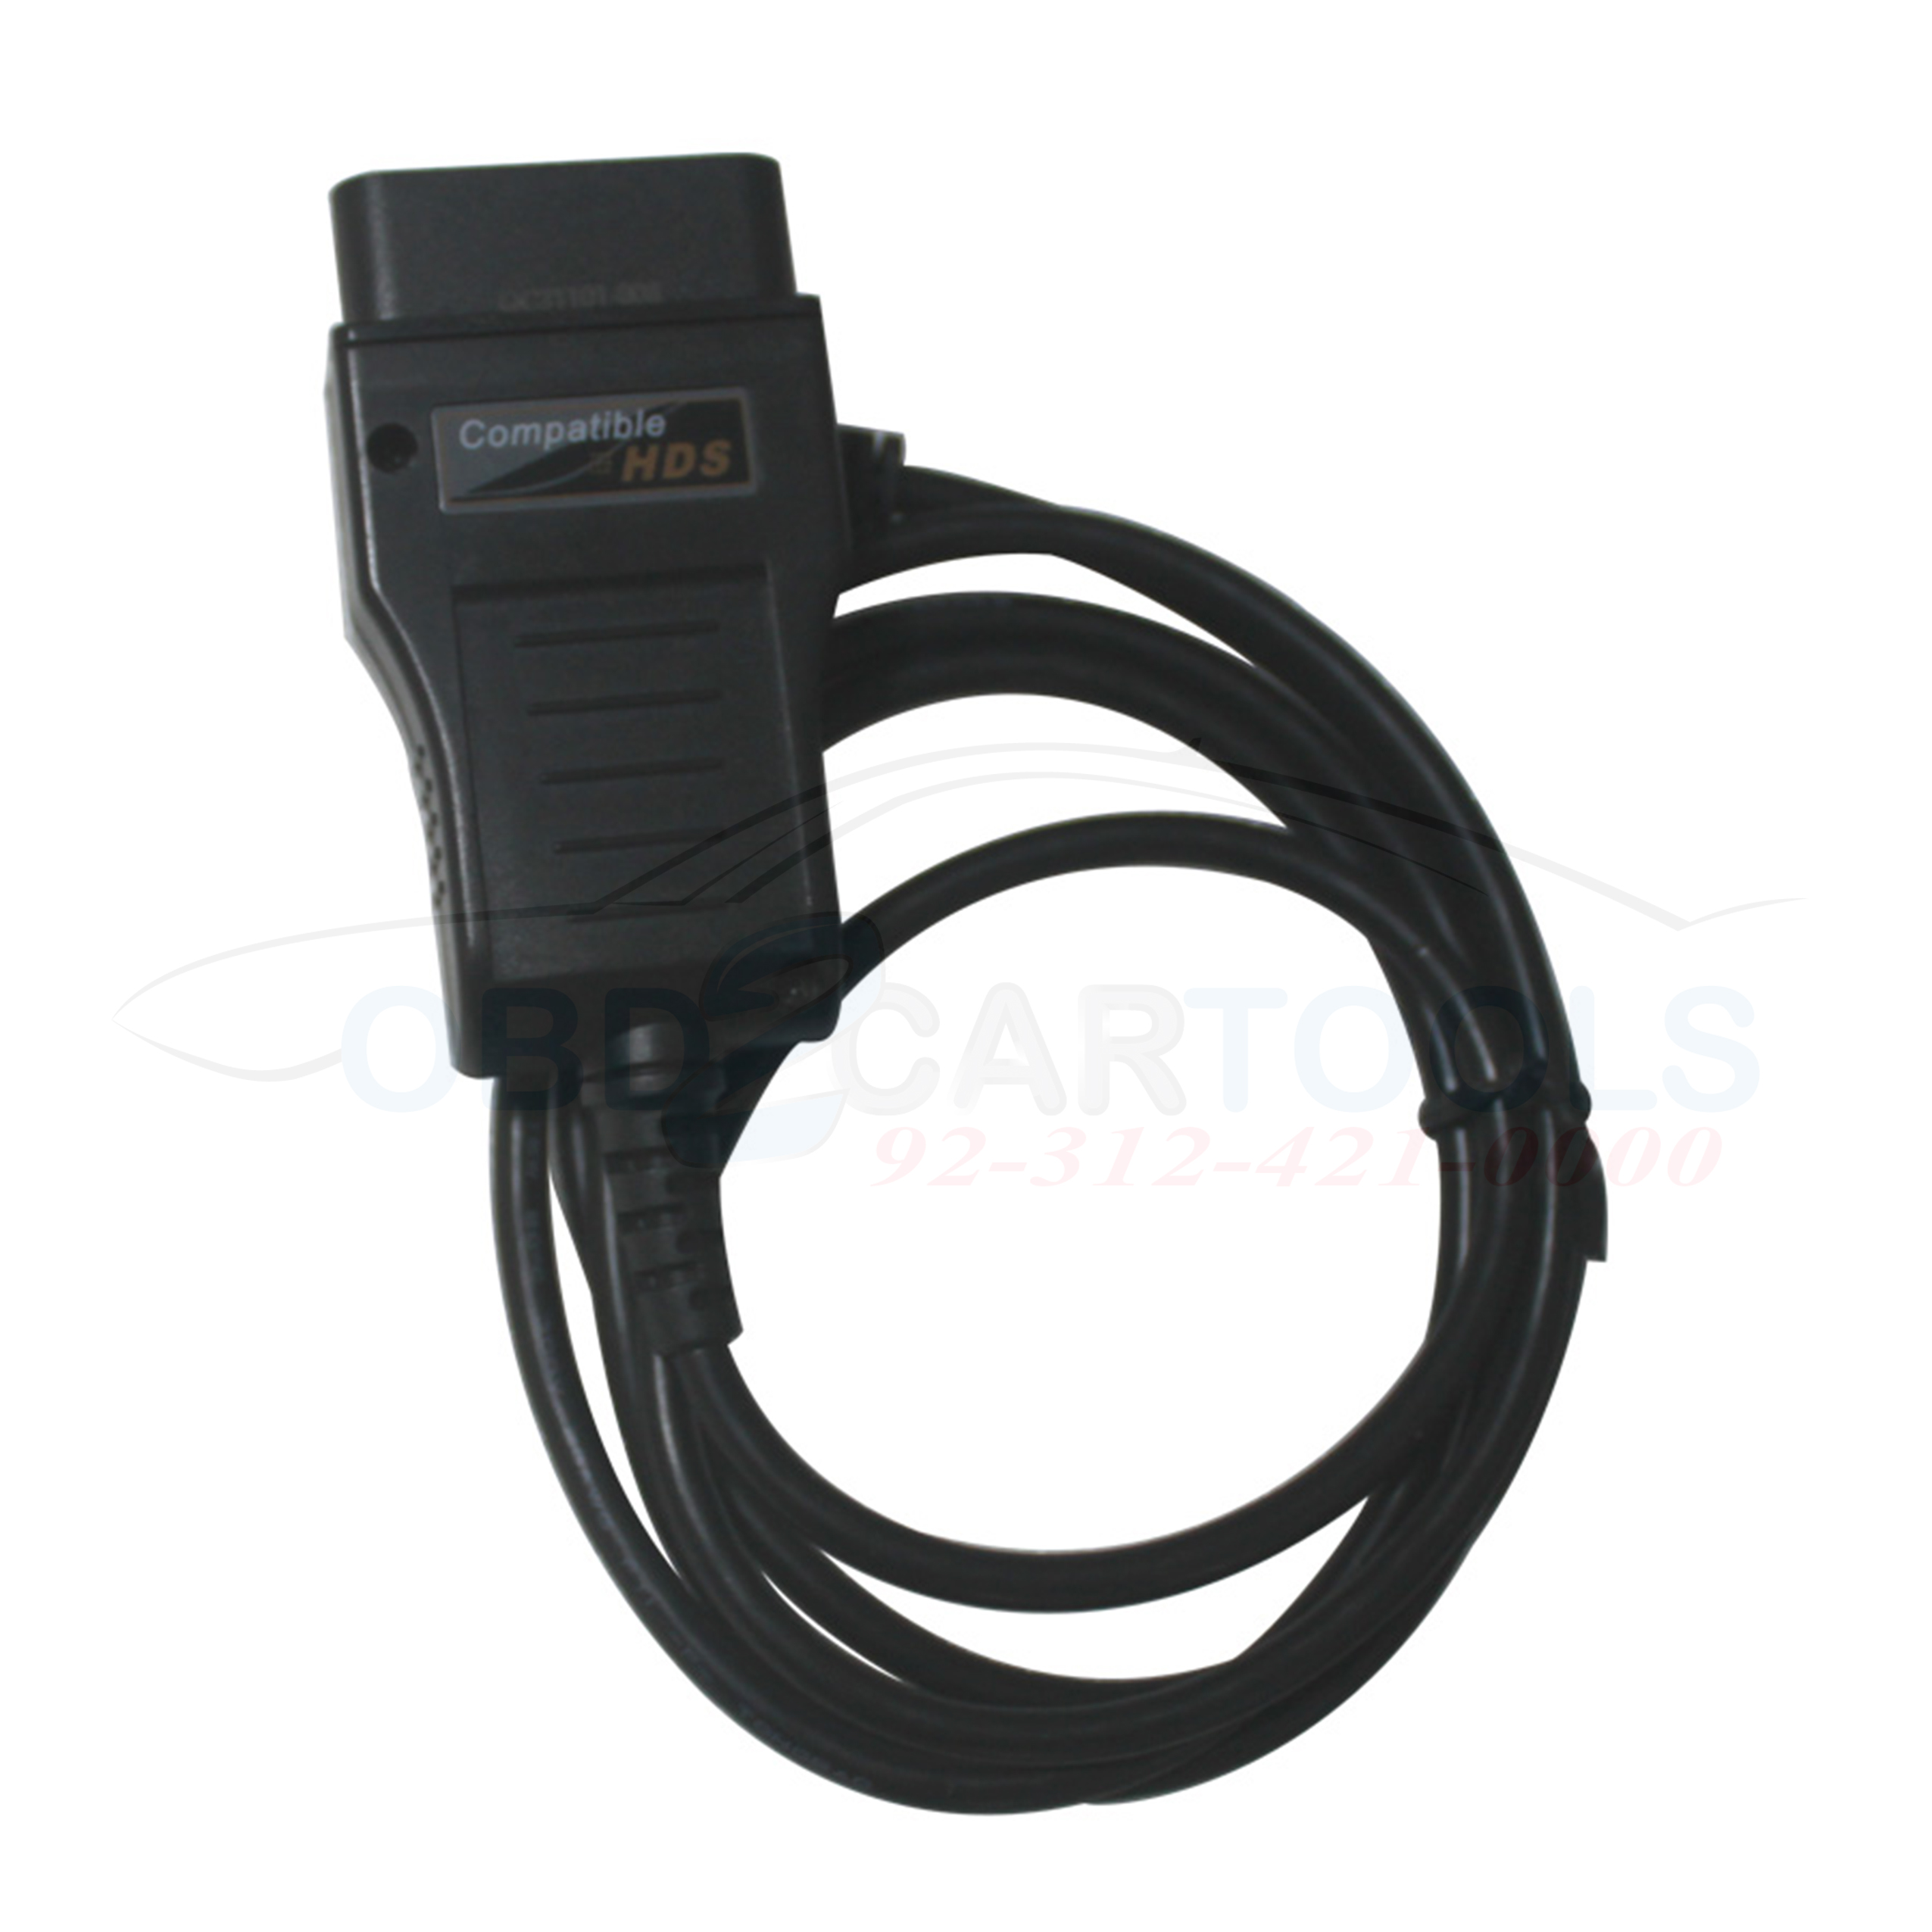 Product image for HONDA HDS Cable OBD2 Diagnostic Cable For All HONDA OBD2 Car Scanner